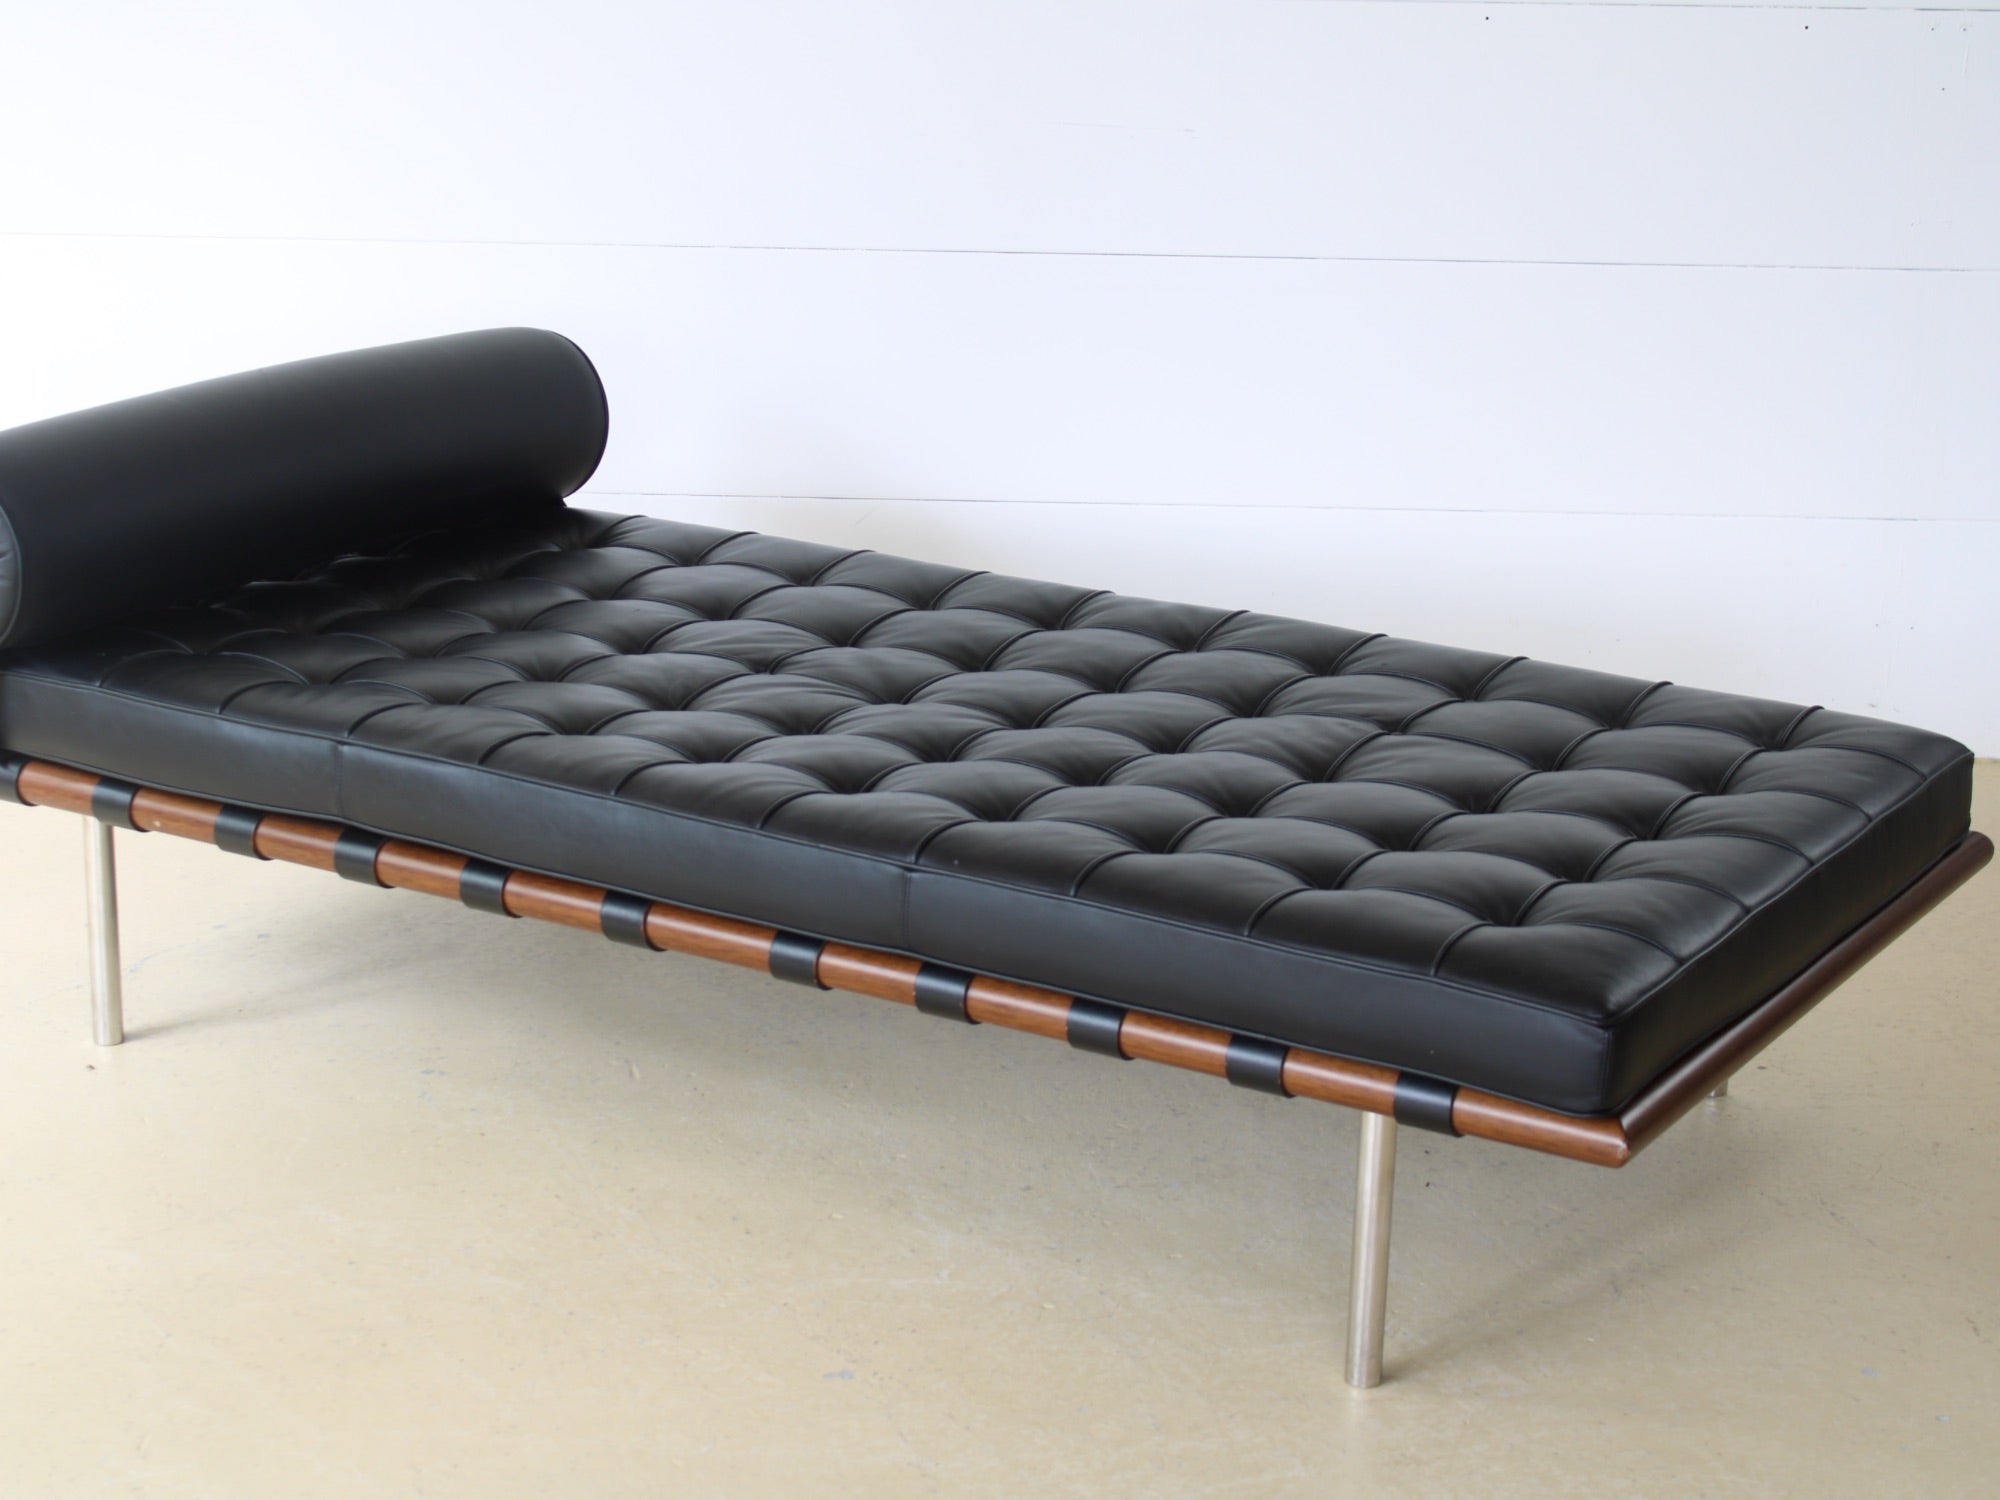 Barcelona Daybed, Ludwig Mies van der Rohe Knoll